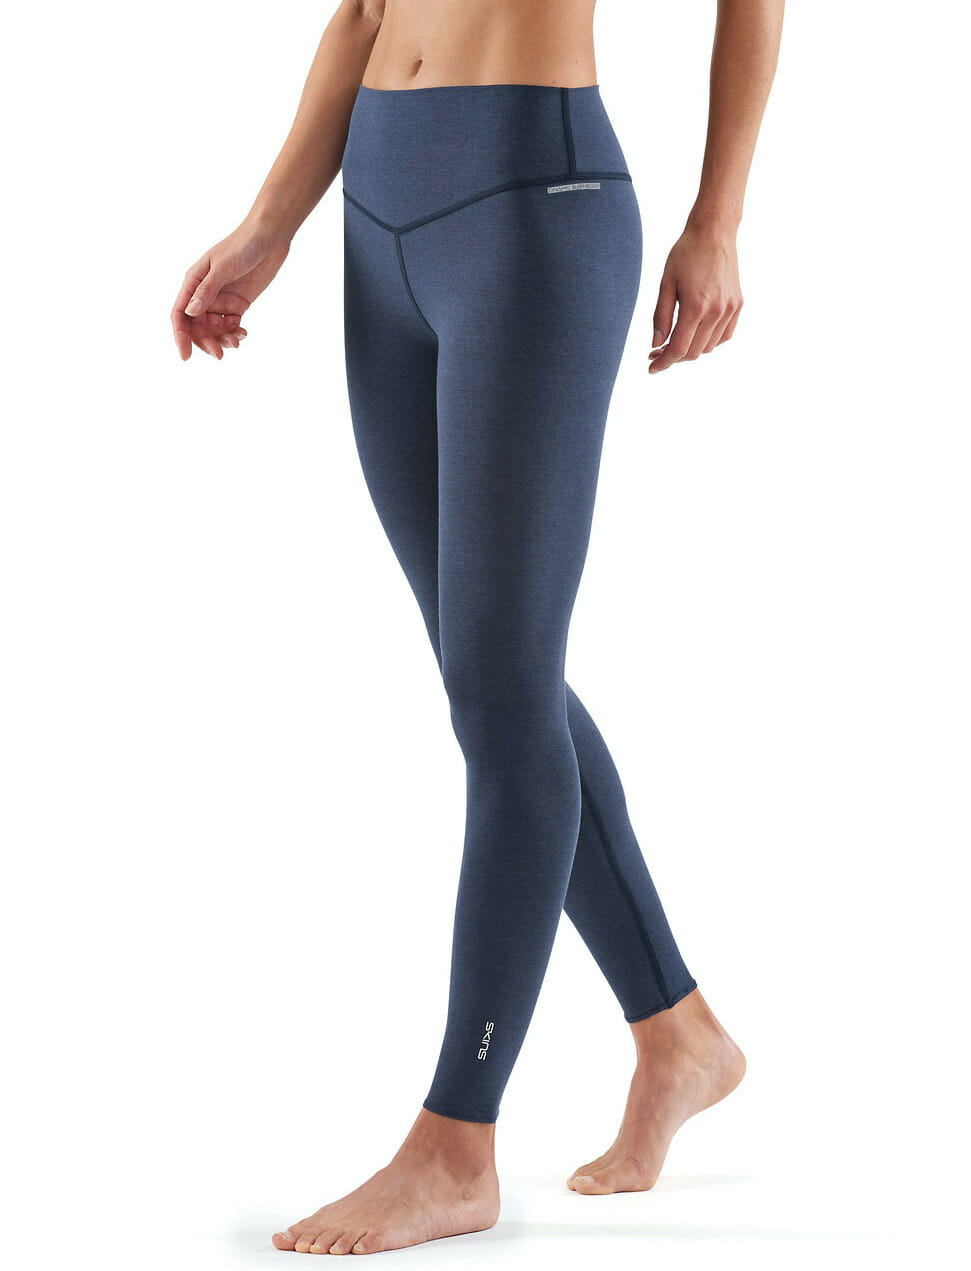 DNAmic Sleep Recovery Womens Long Tights Navy Blue/Marle - SKINS